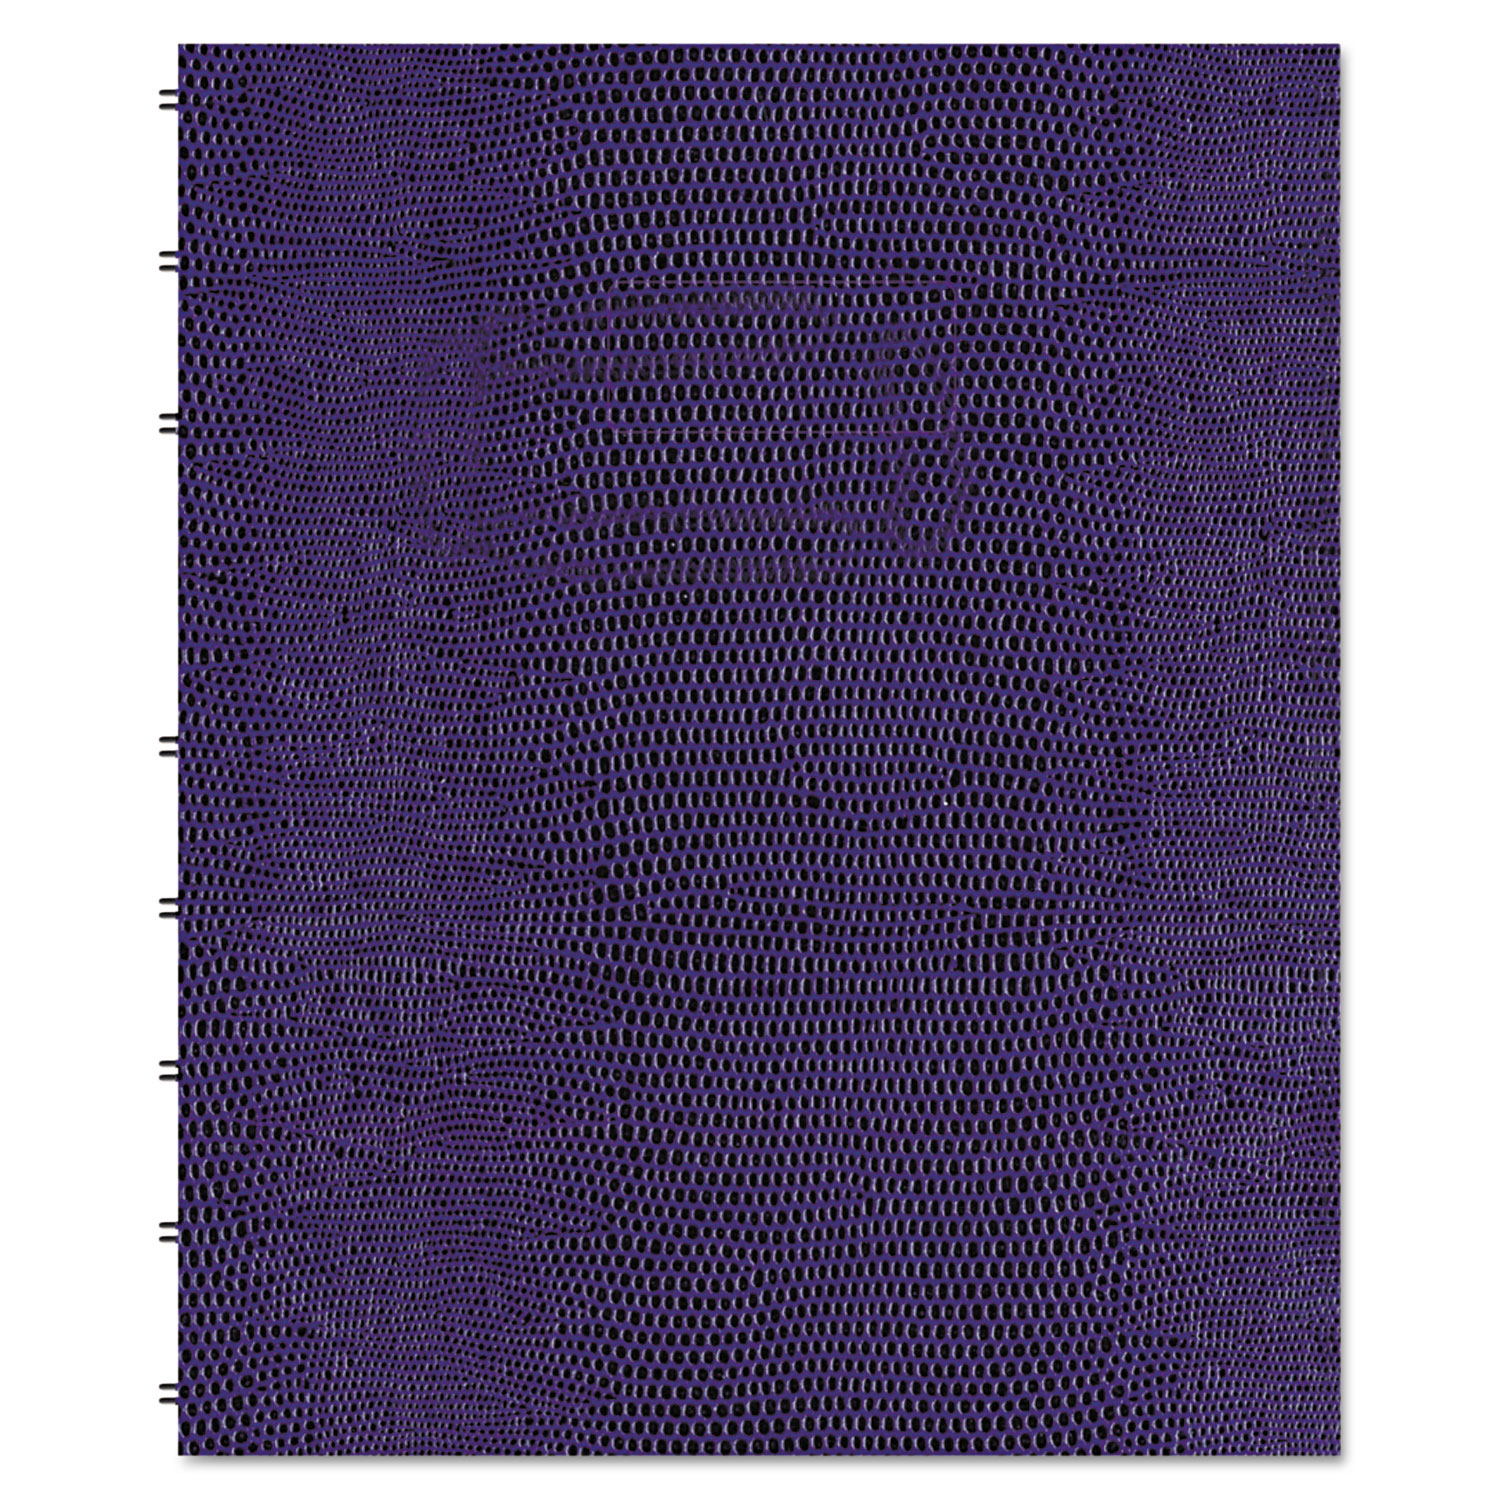  Blueline AF9150.86 MiracleBind Notebook, 1 Subject, Medium/College Rule, Purple Cover, 9.25 x 7.25, 75 Sheets (REDAF915086) 